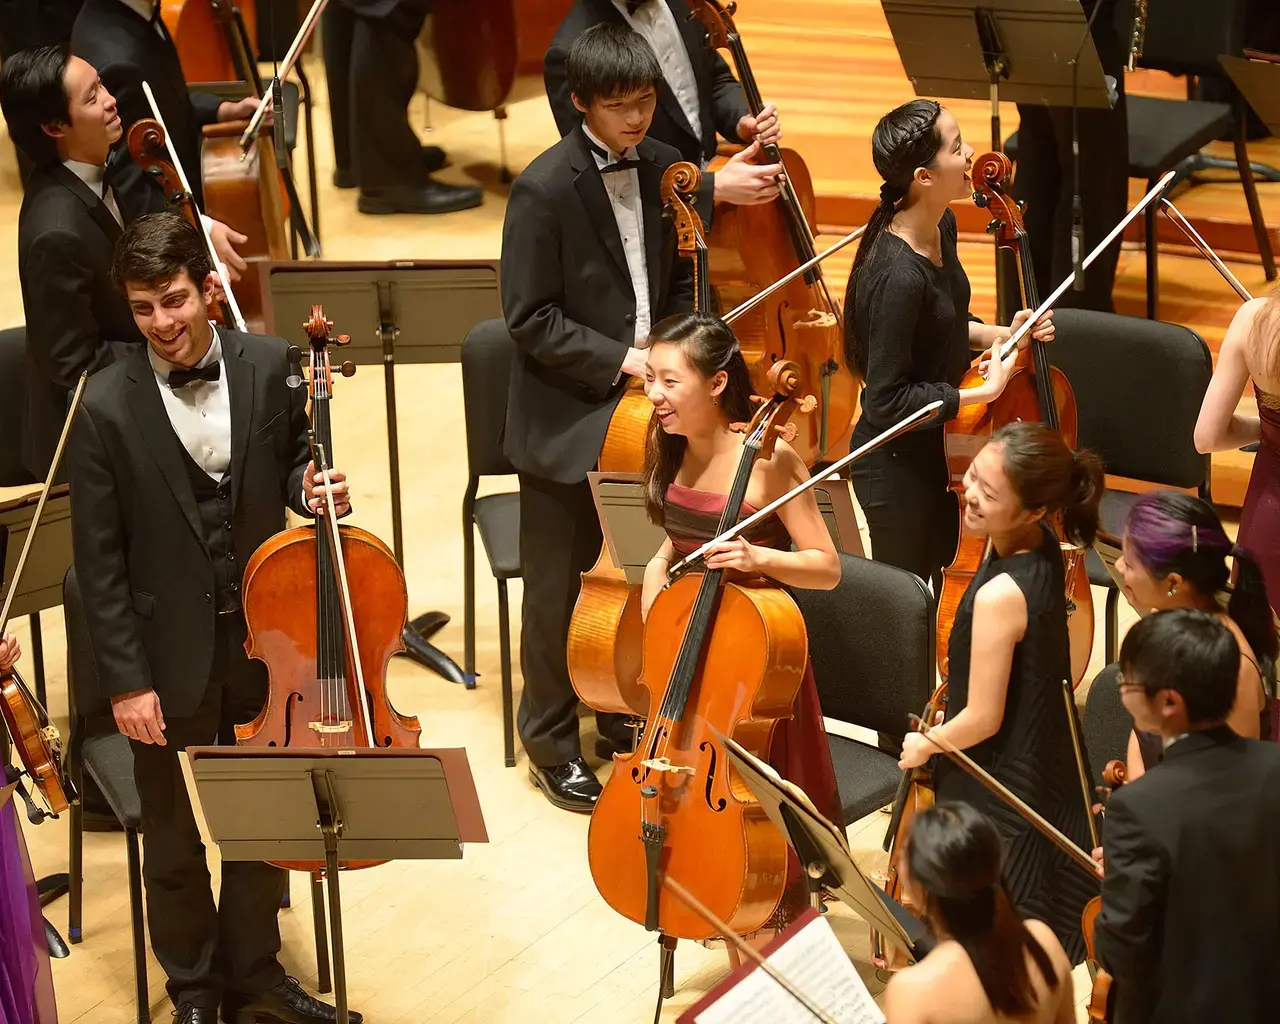 Curtis Symphony Orchestra on stage in Verizon Hall at the Kimmel Center for the Performing Arts, 2014. Photo by David DeBalko.